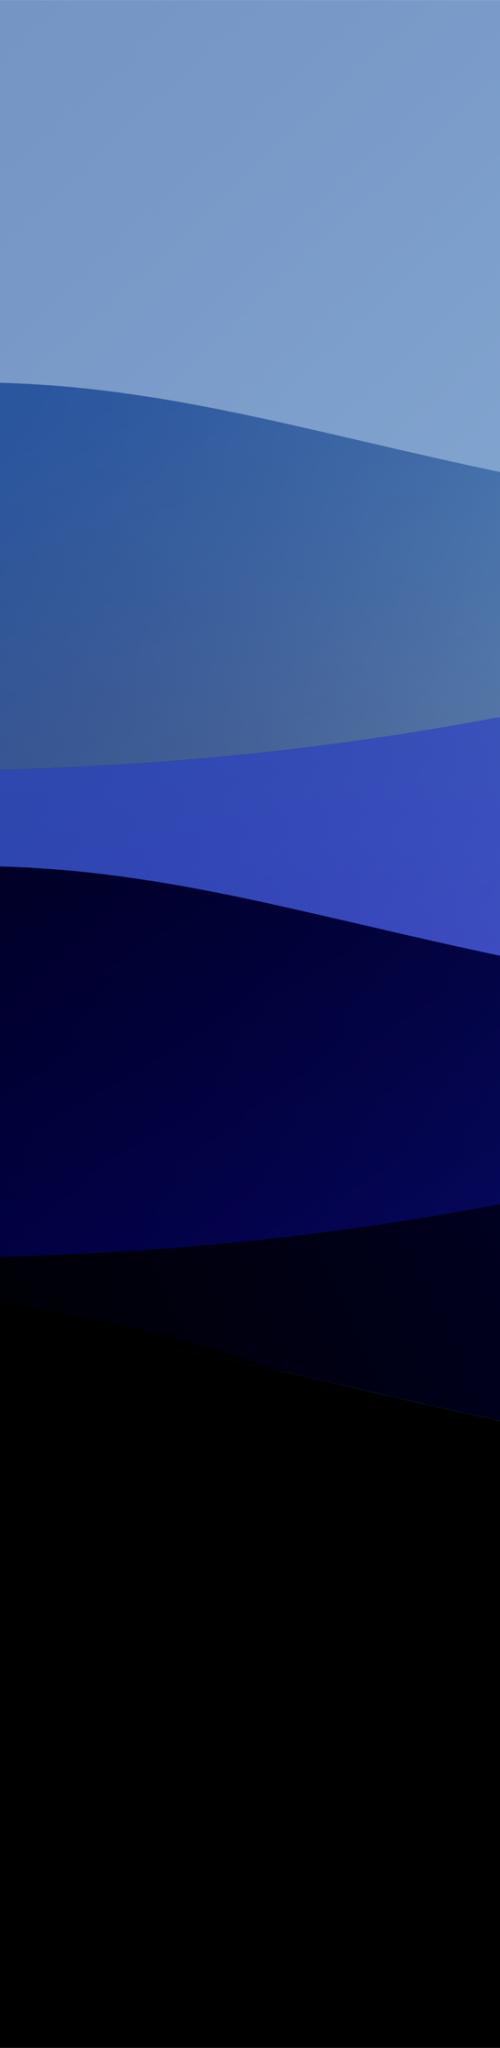 500x2048 Resolution Abstract Wave Hd Blue 500x2048 Resolution Wallpaper